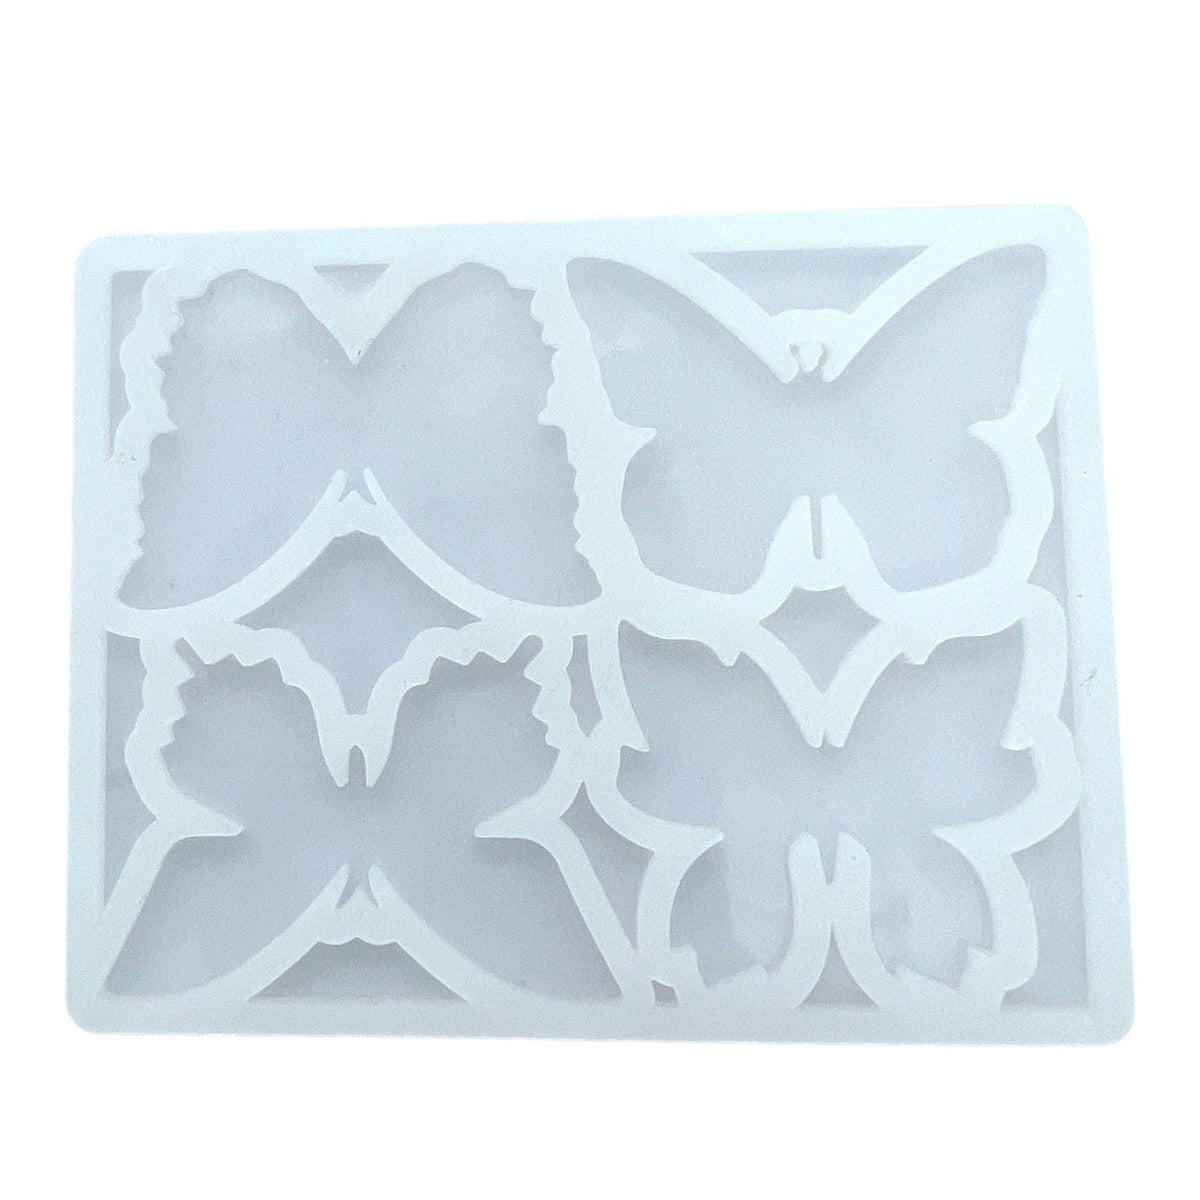 Beautiful Butterfly Mold Set for UV or Epoxy Resin